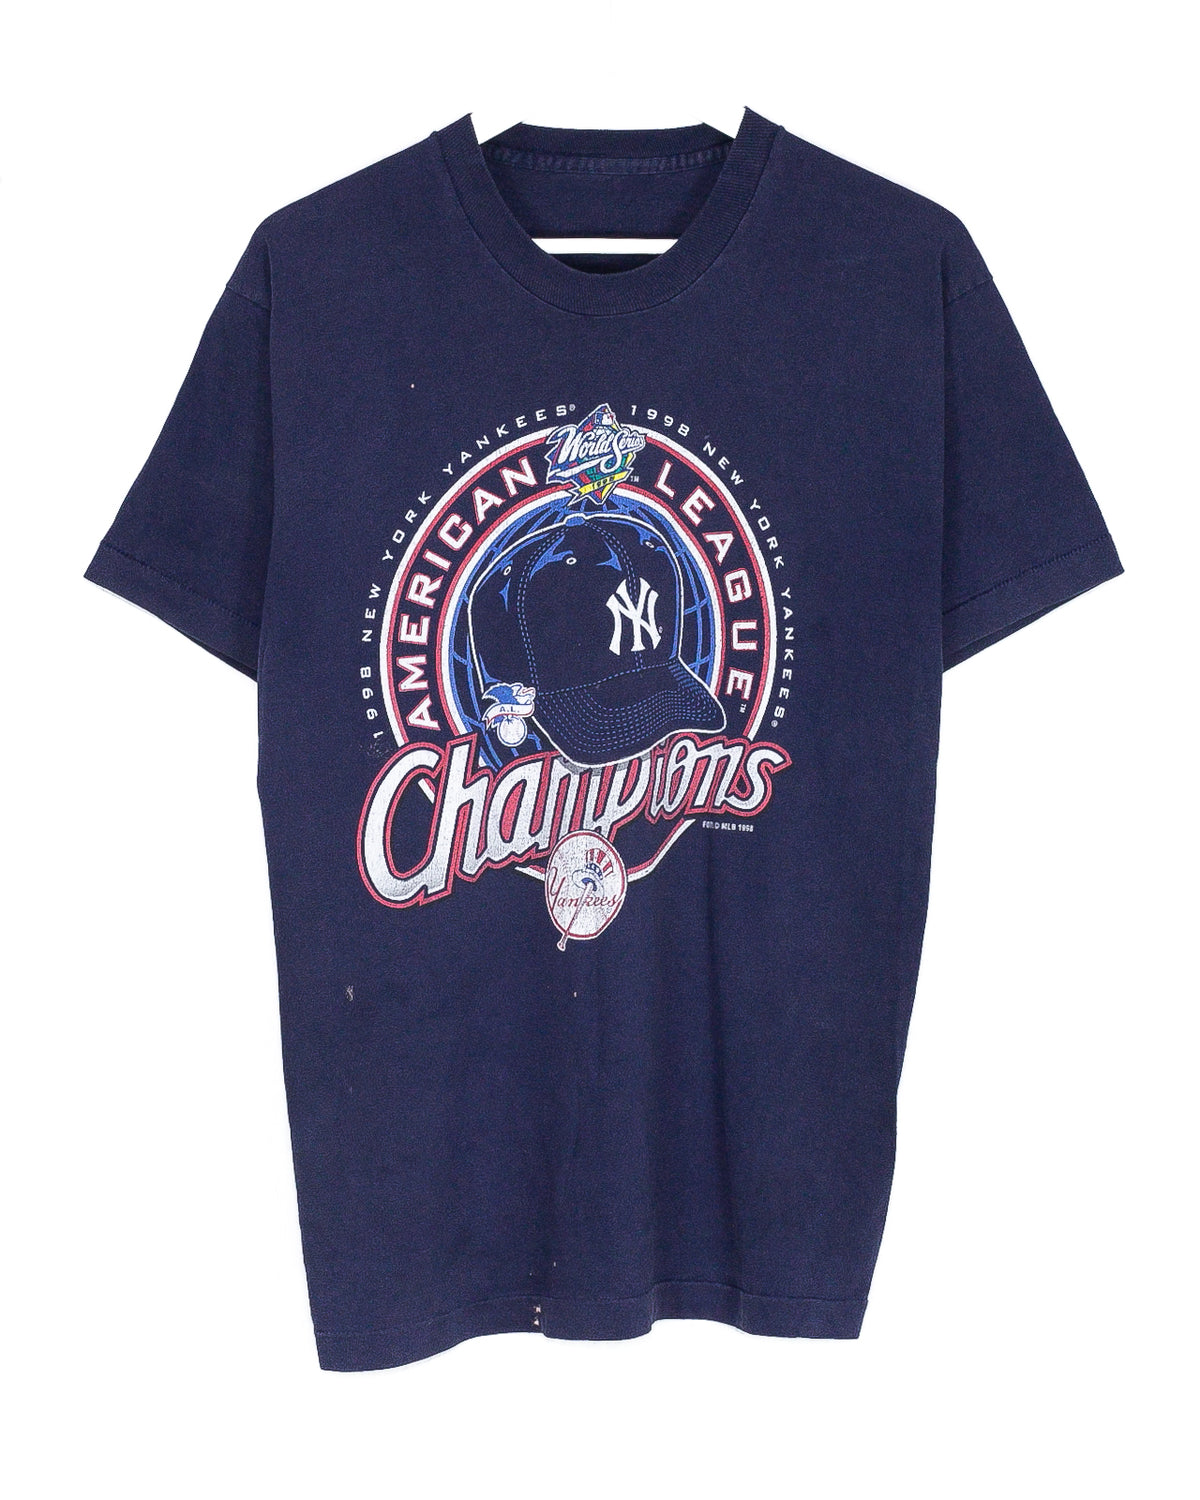 Take a look at the best Vintage '98 Yankees T-shirt L/XL Storeroom Vintage T -Shirt available at unbeatable Prices